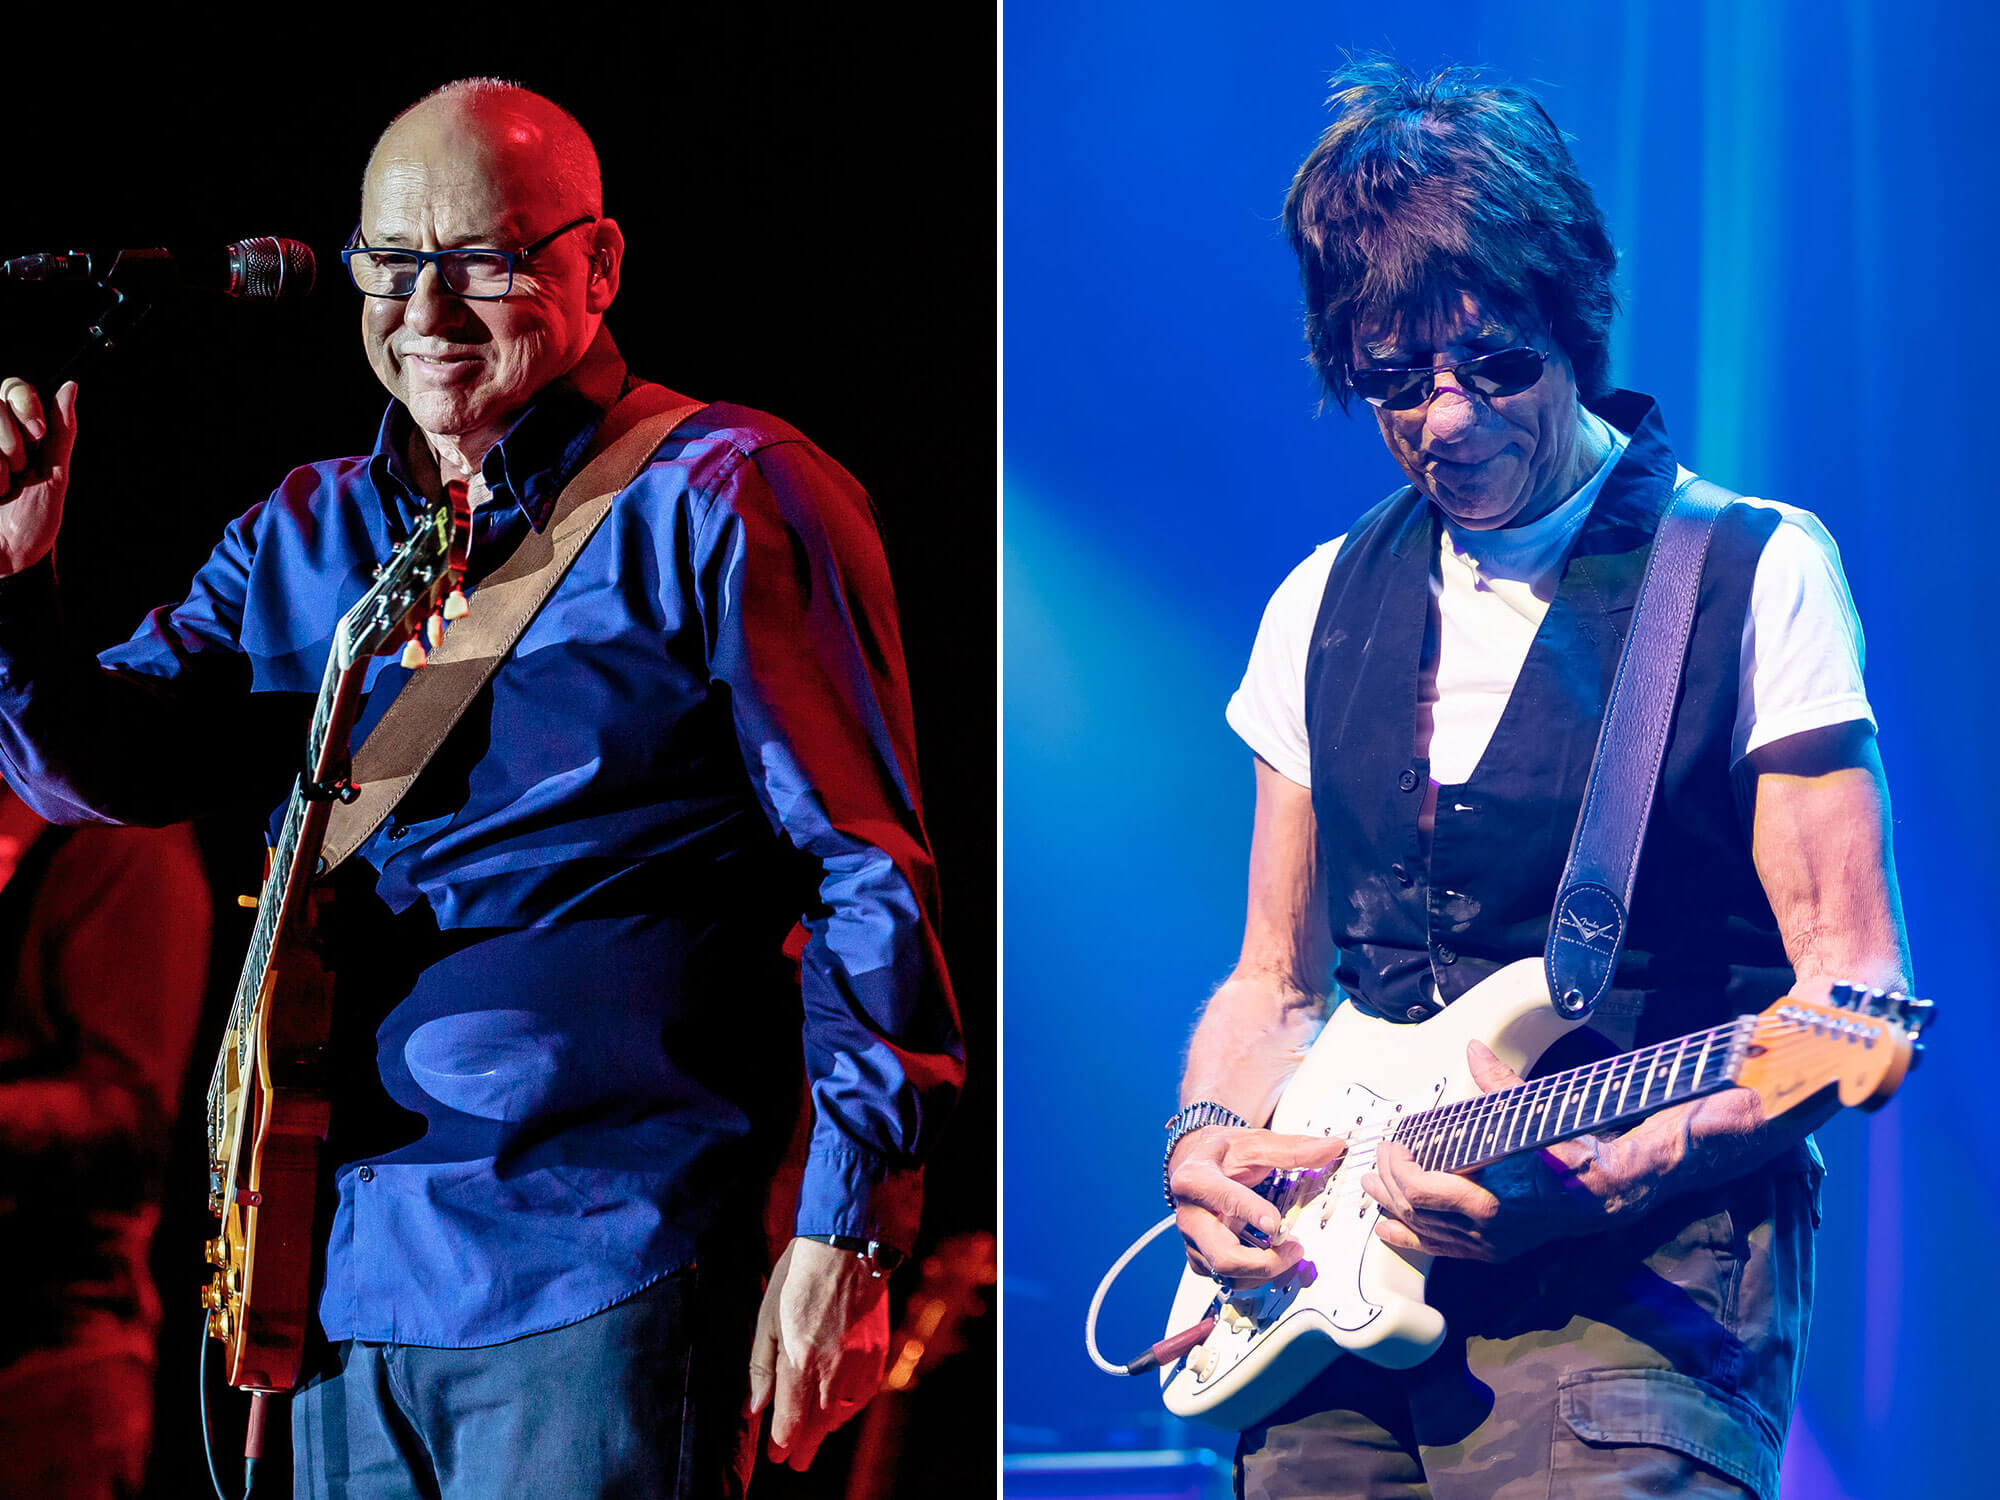 [L-R] Mark Knopfler and Jeff Beck